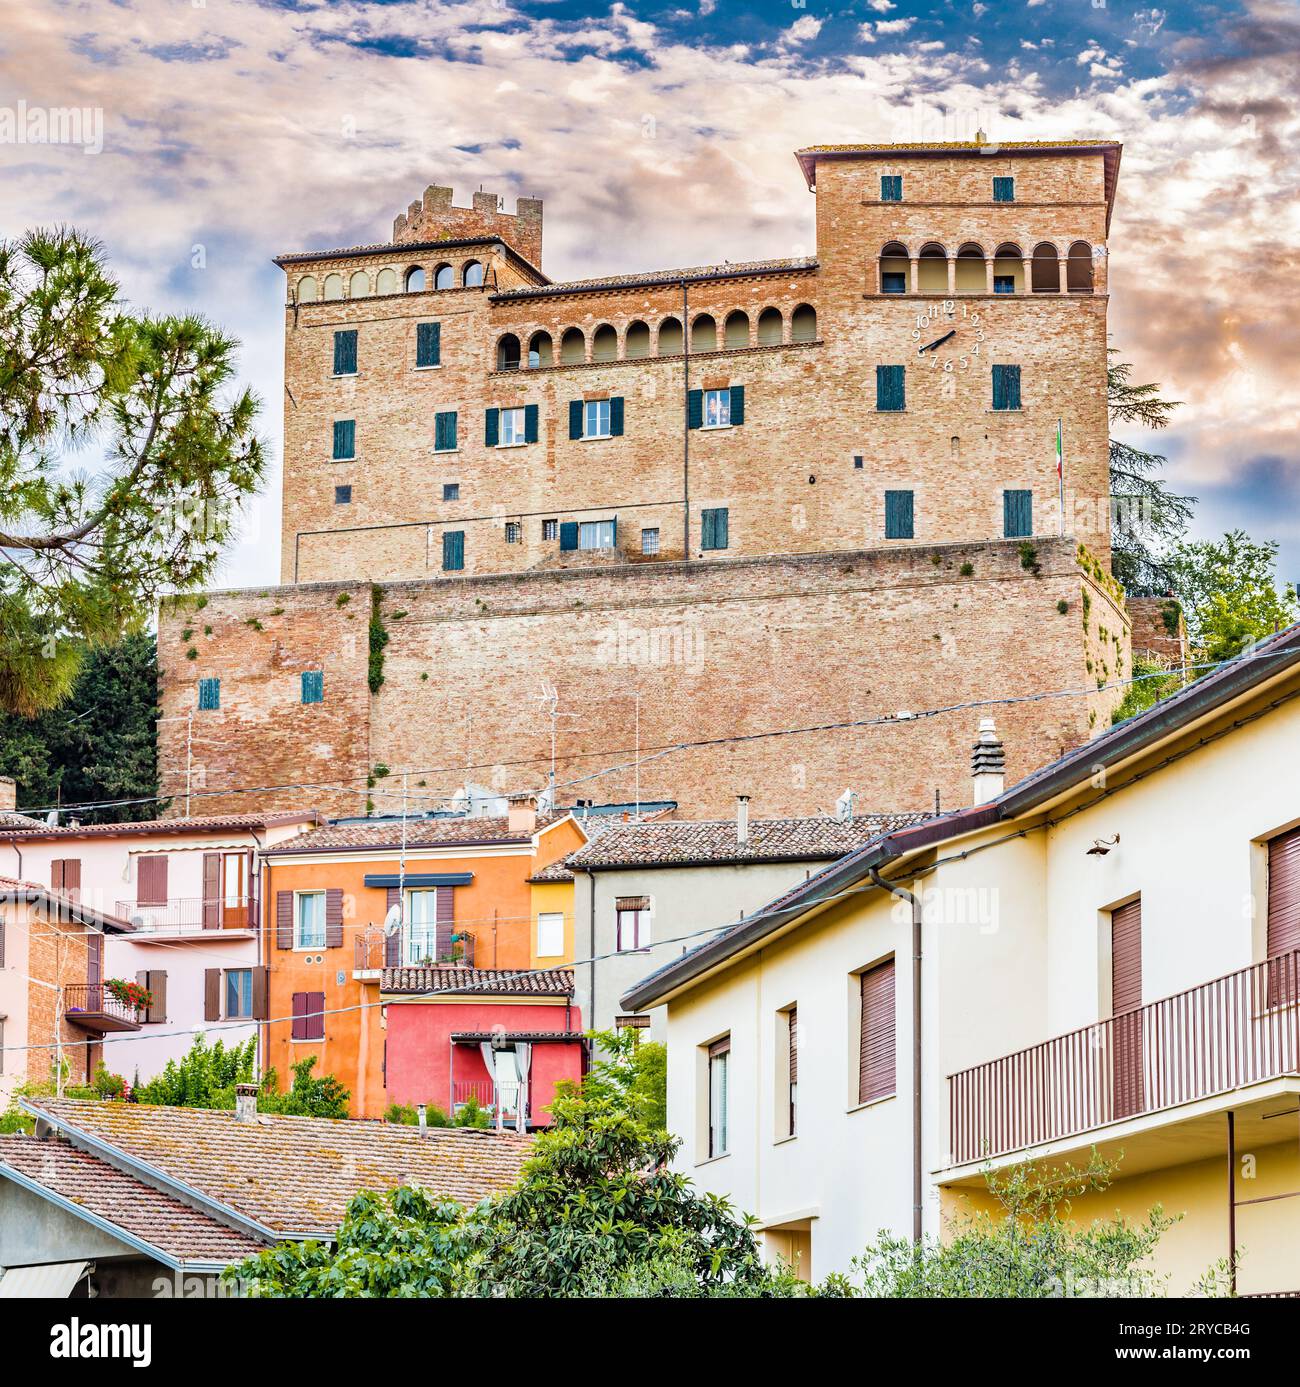 Castle overlooking the colorful houses Stock Photo